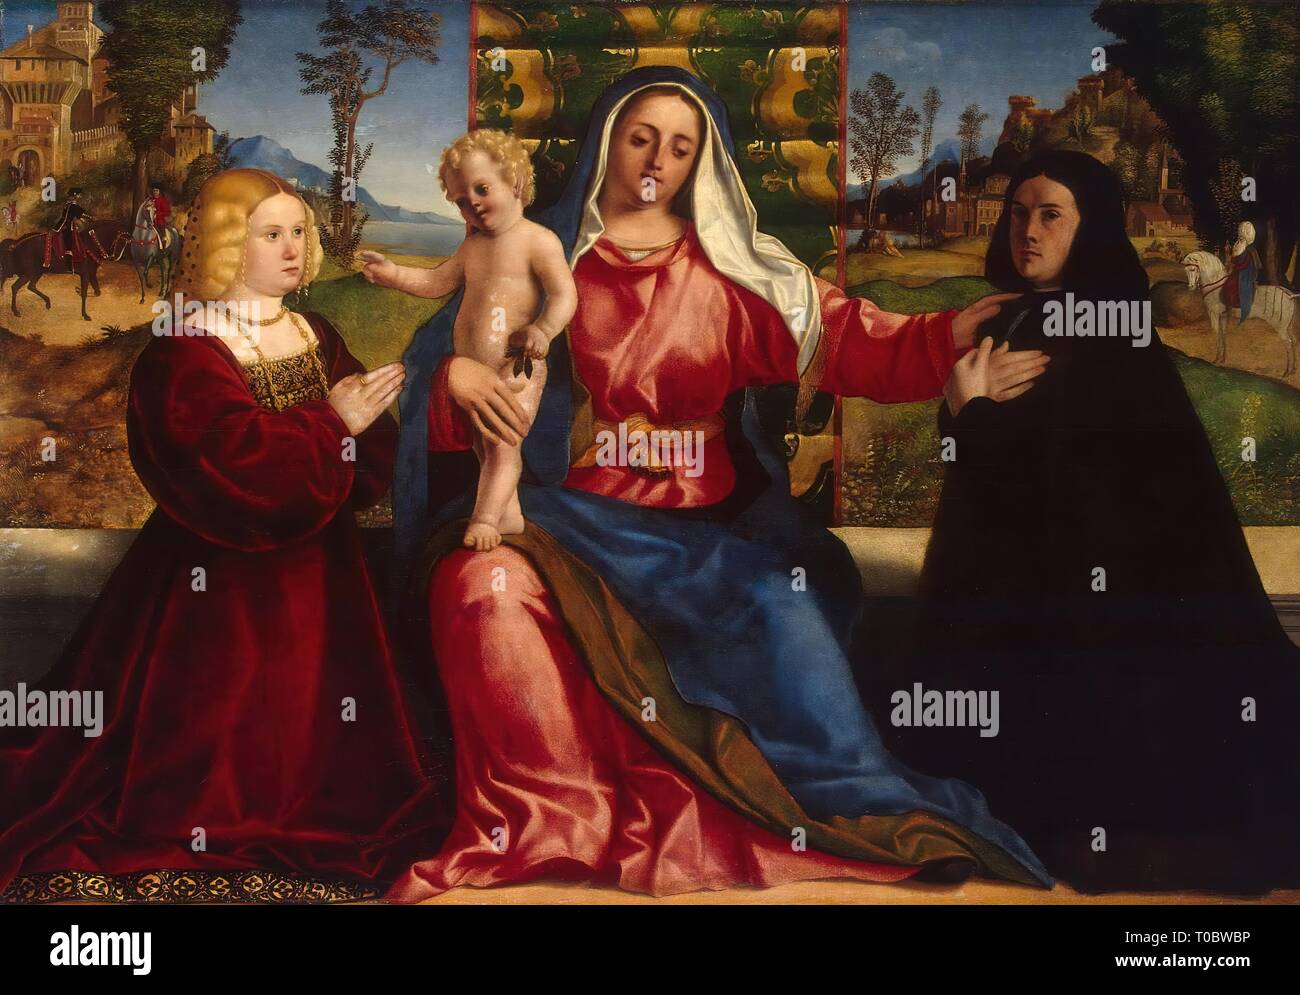 'Madonna and Child with Donors'. Italy, Circa 1505. Dimensions: 120x173 cm. Museum: State Hermitage, St. Petersburg. Author: Palma, Jacopo, il vecchio (Jacopo Nigreti). Palma il Vecchio, Jacopo, the Elder. Stock Photo